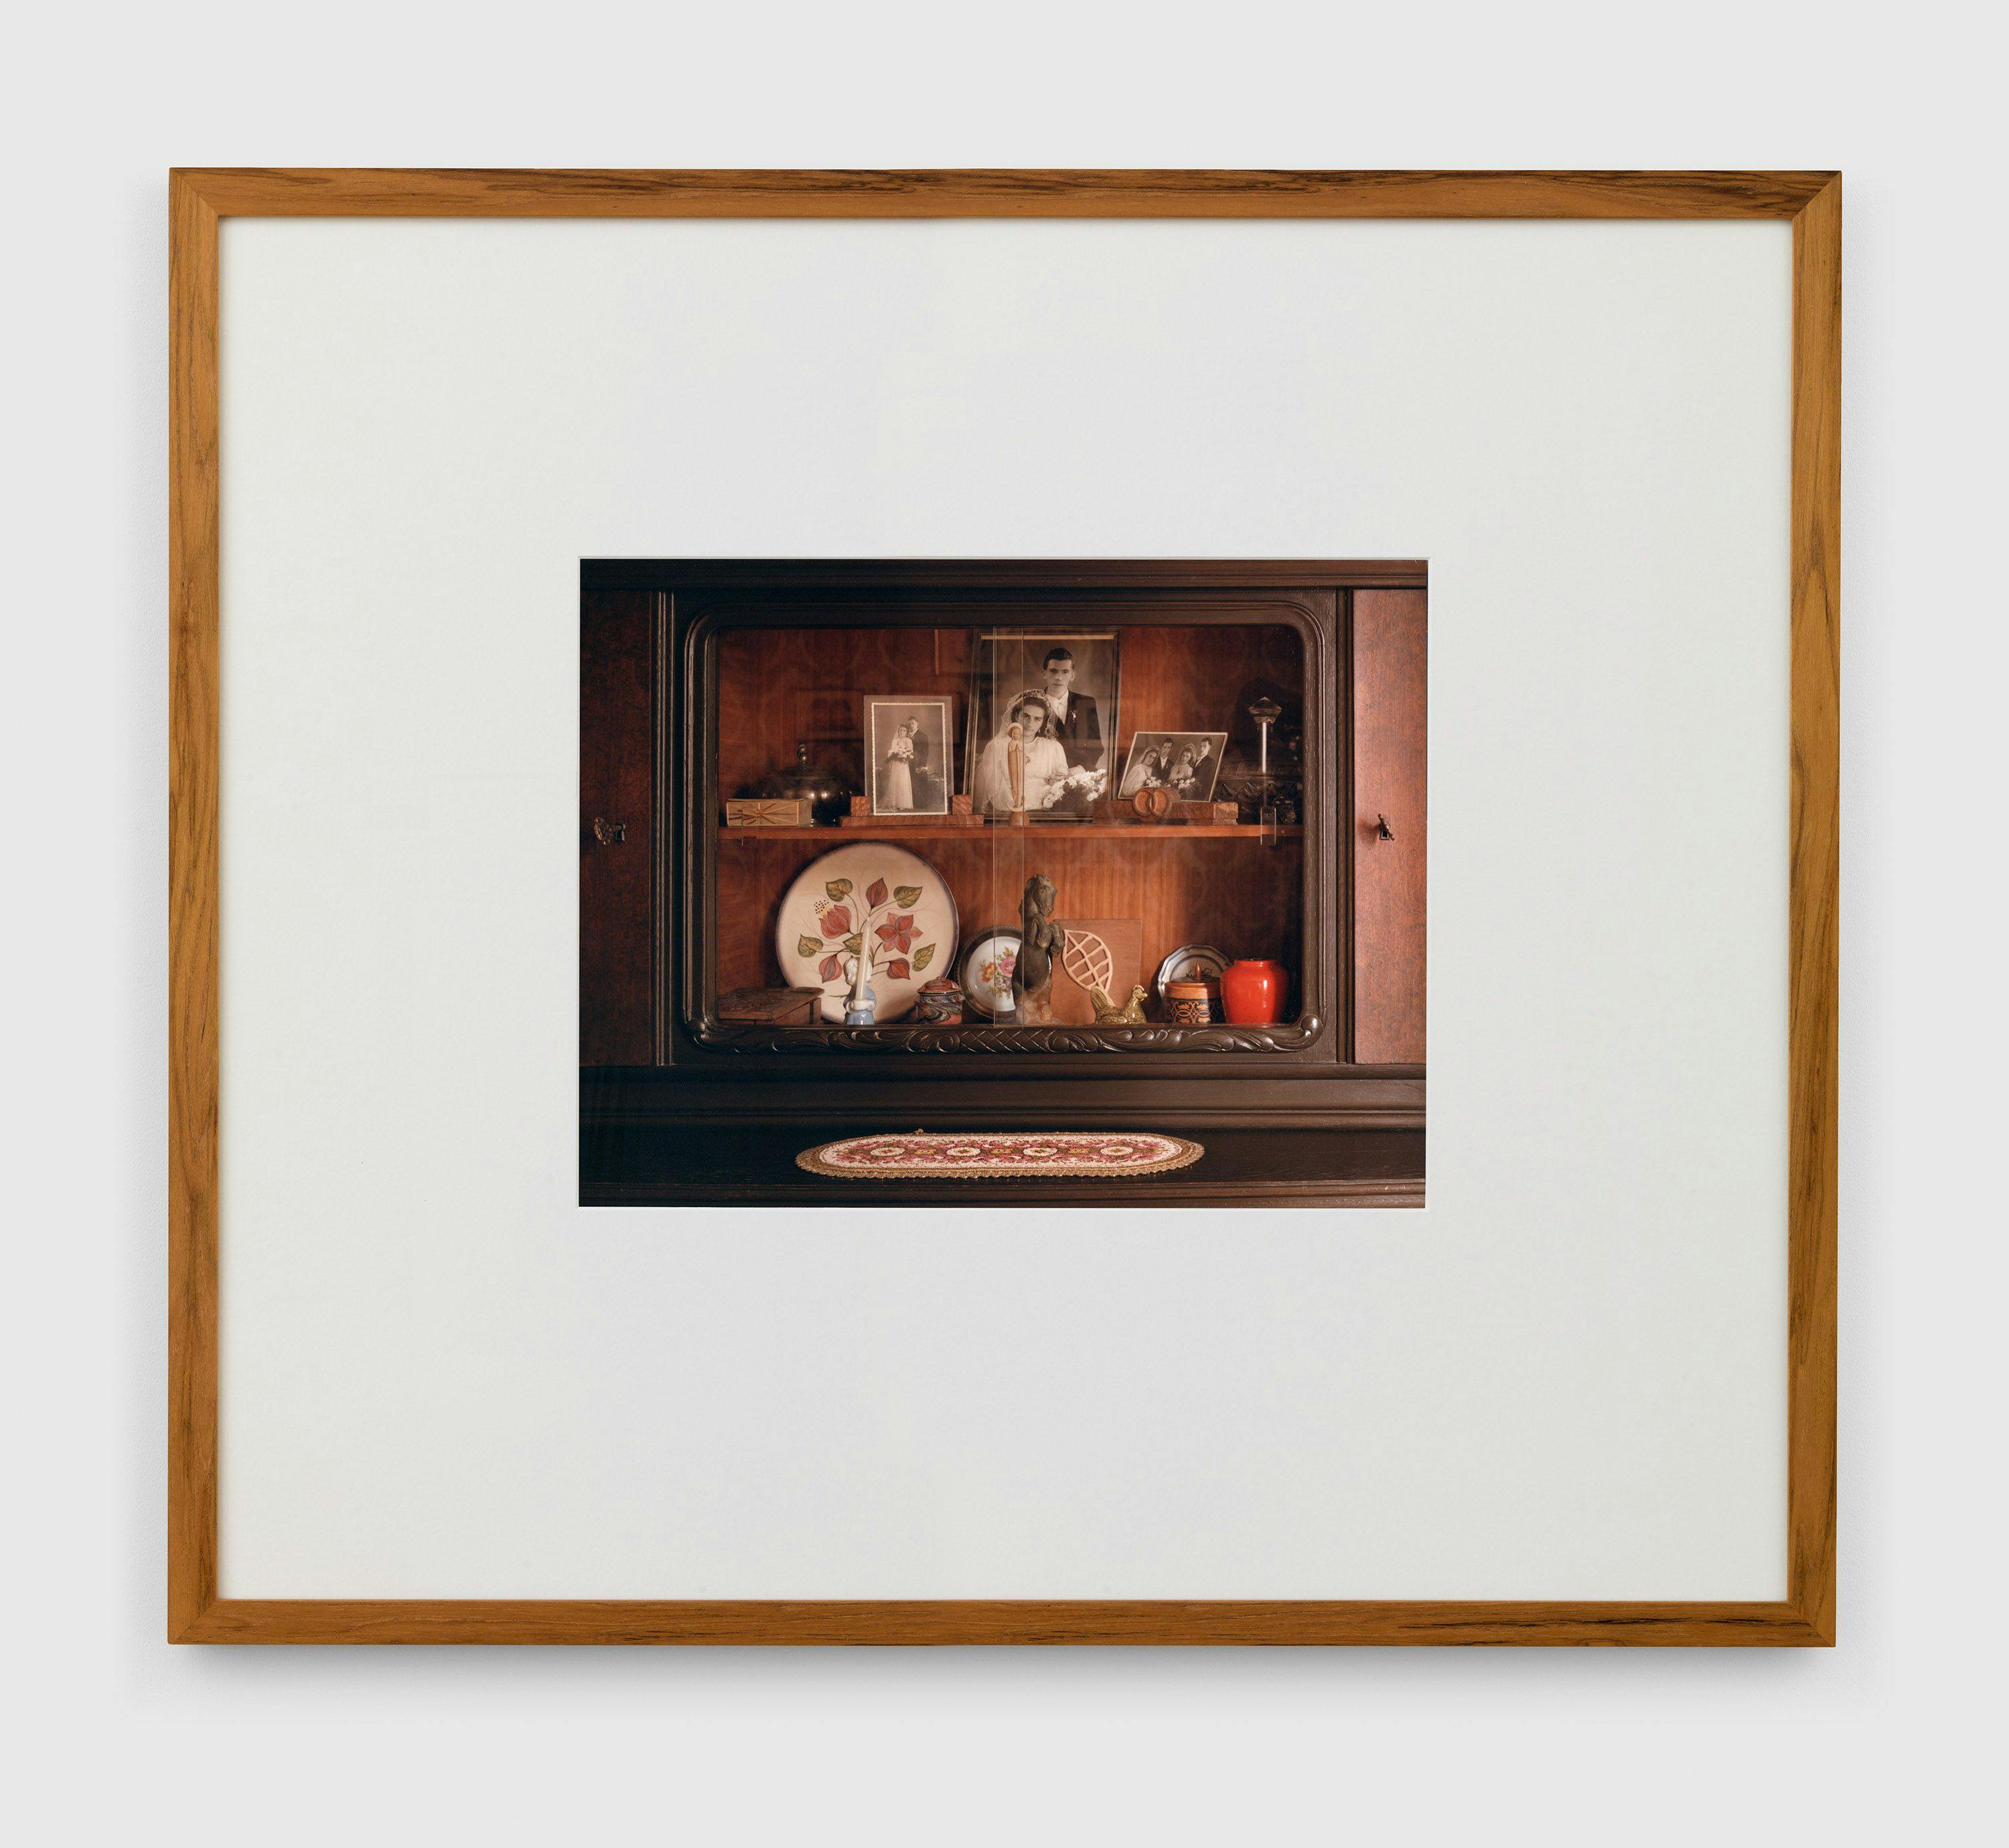 A chromogenic print by Thomas Ruff, titled Interieur 4B, dated 1980.